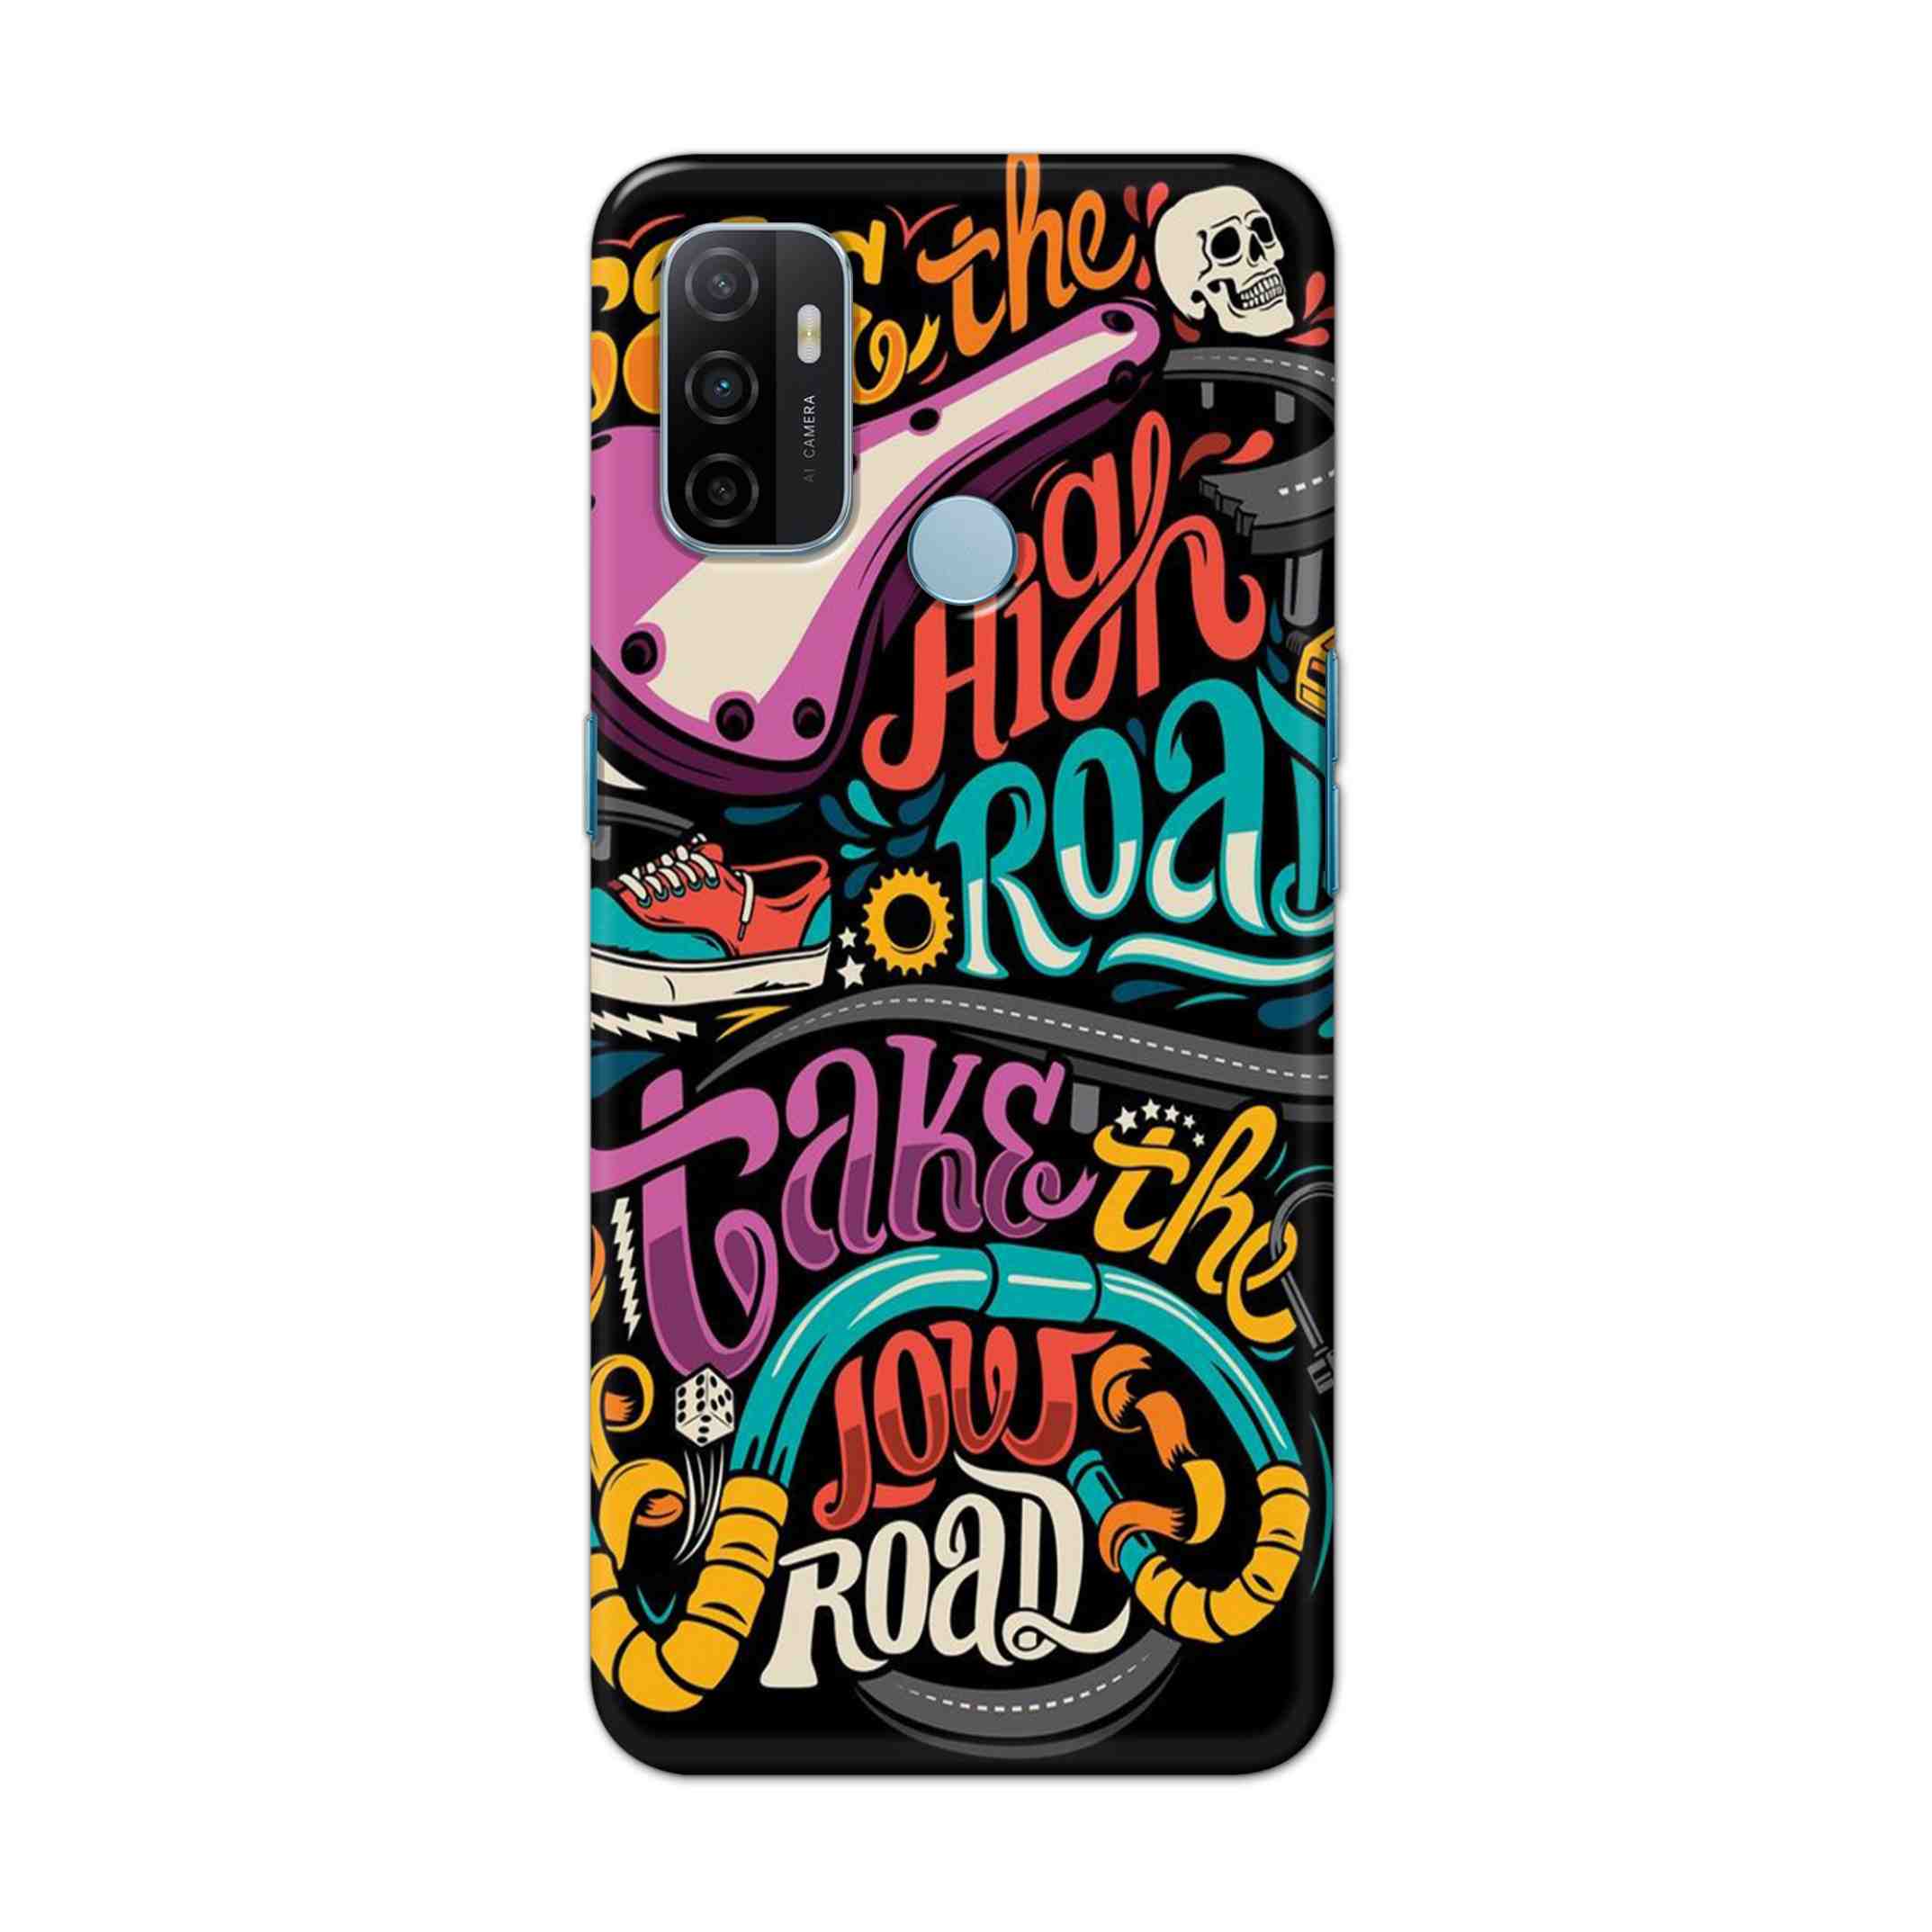 Buy Take The High Road Hard Back Mobile Phone Case Cover For OPPO A53 (2020) Online